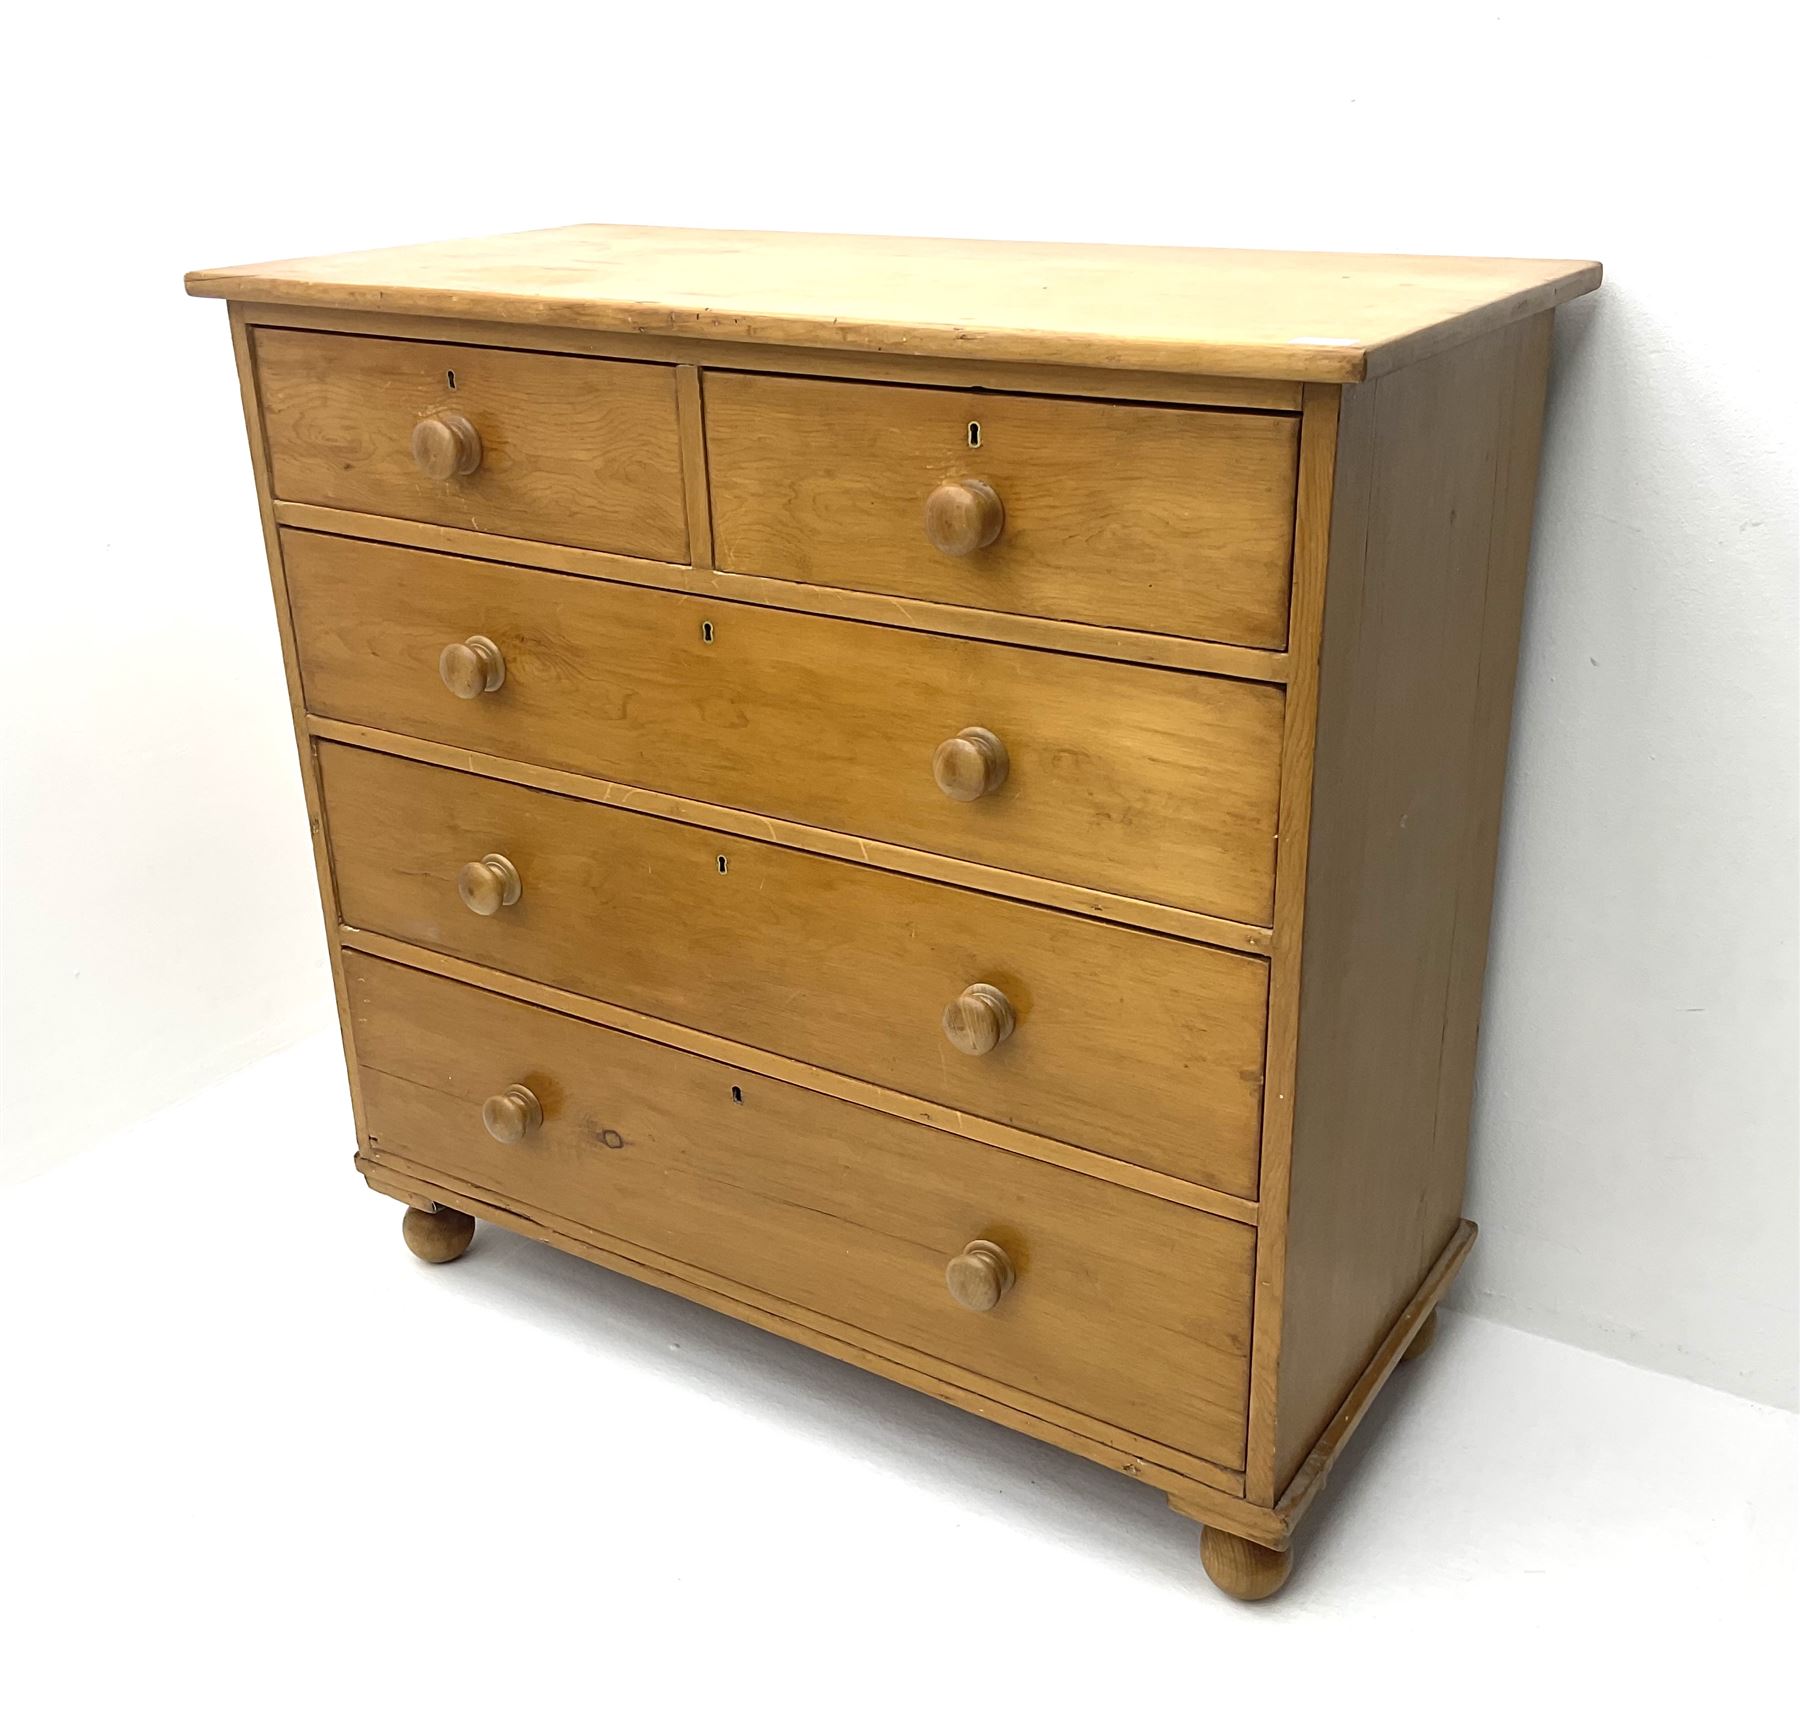 Victorian pine chest - Image 2 of 4